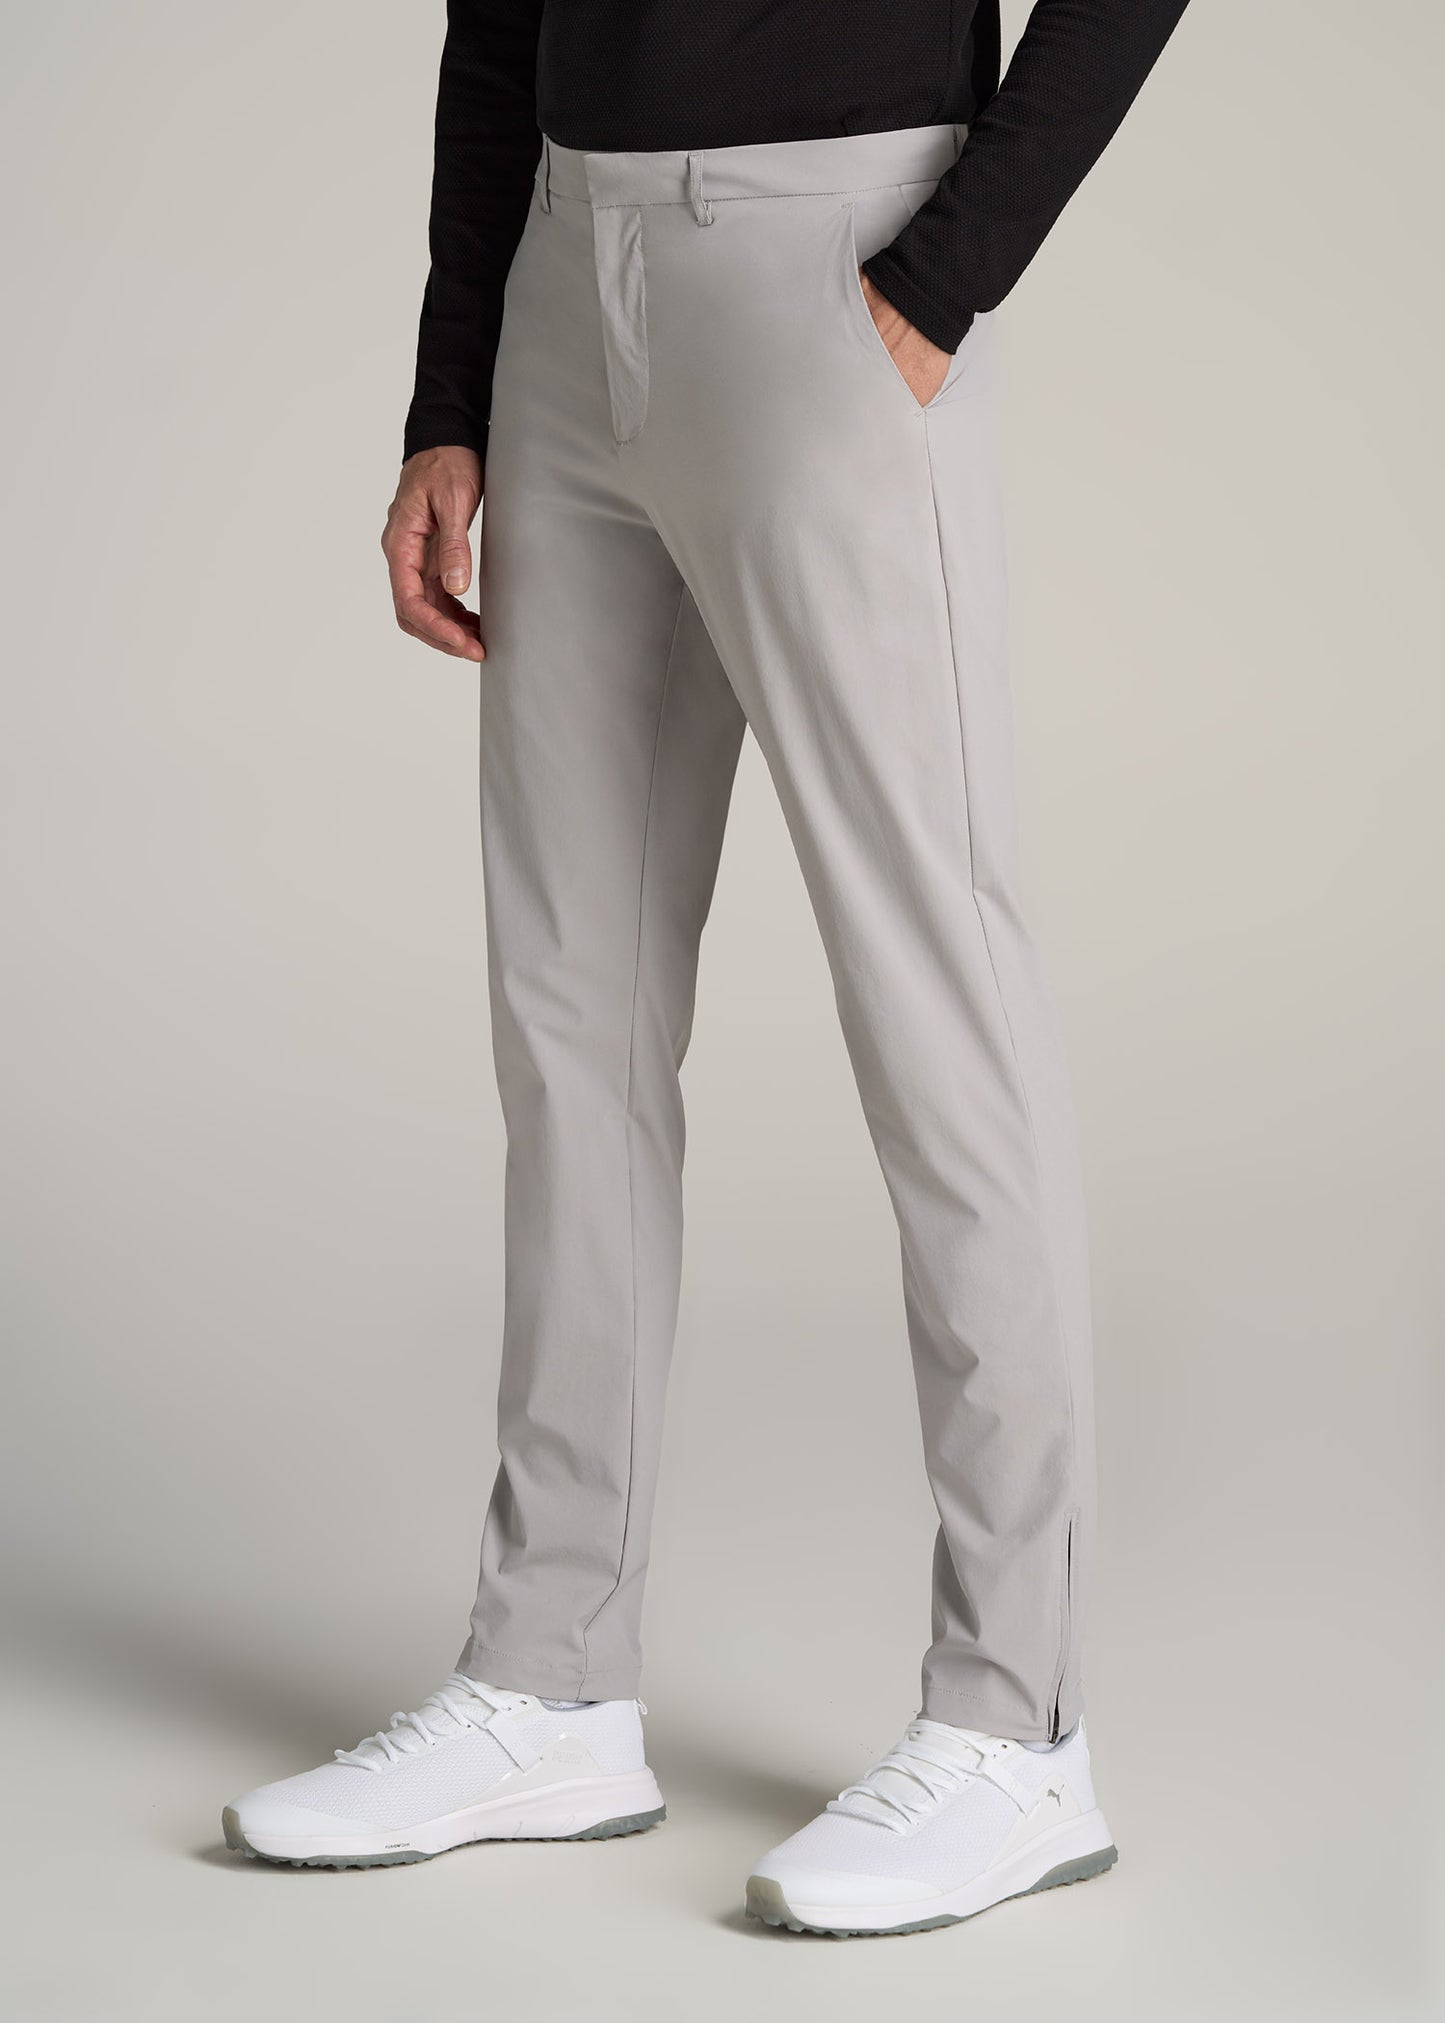 Comfortable Golf Trousers for Men - J.Lindeberg